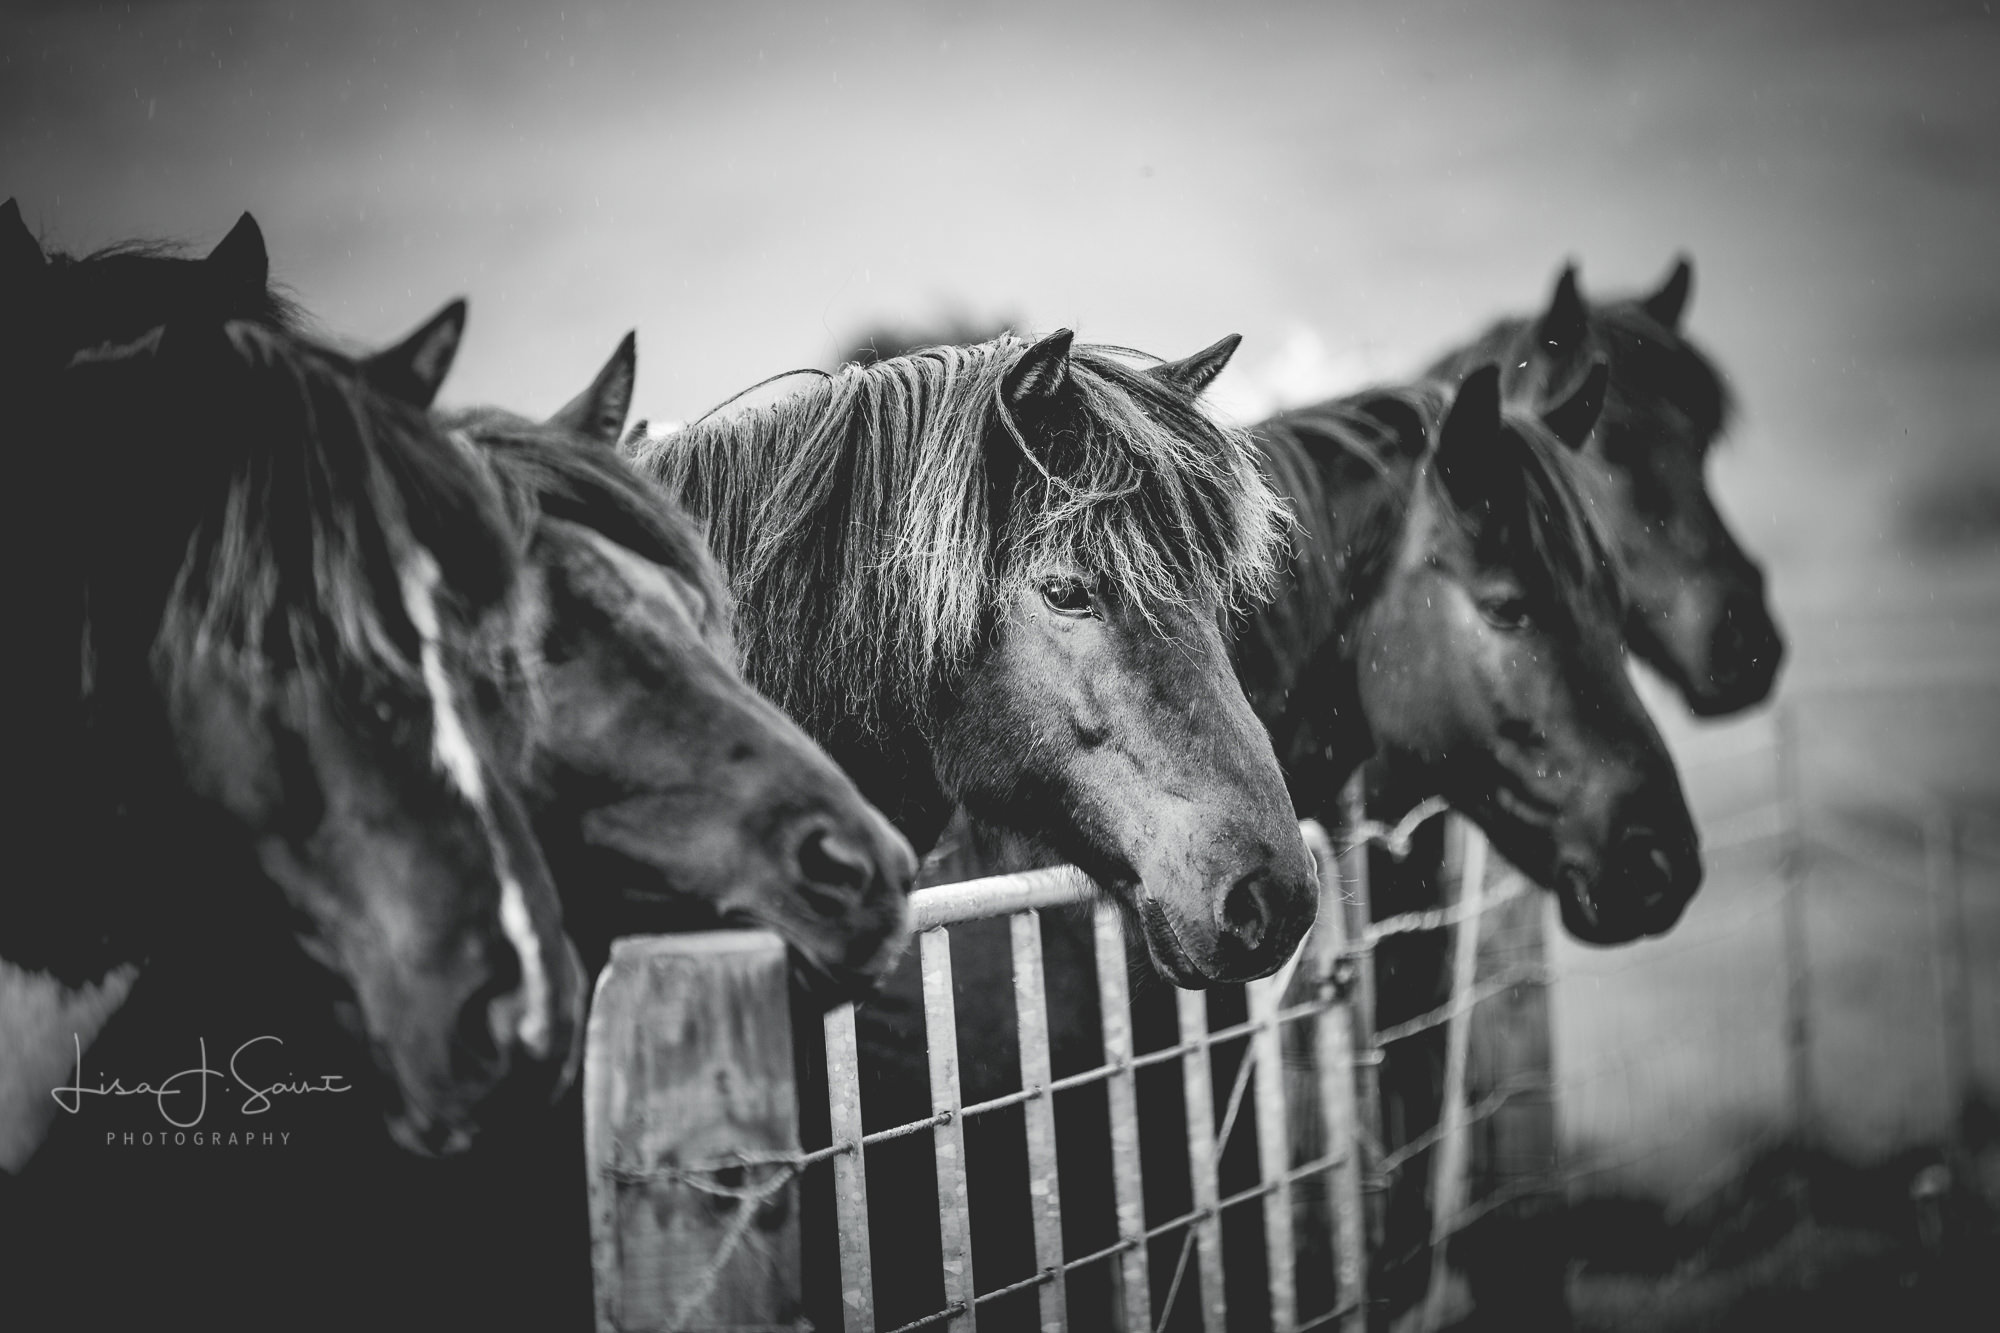 Patiently Waiting: Horse print in Black and White – Lisa Saint